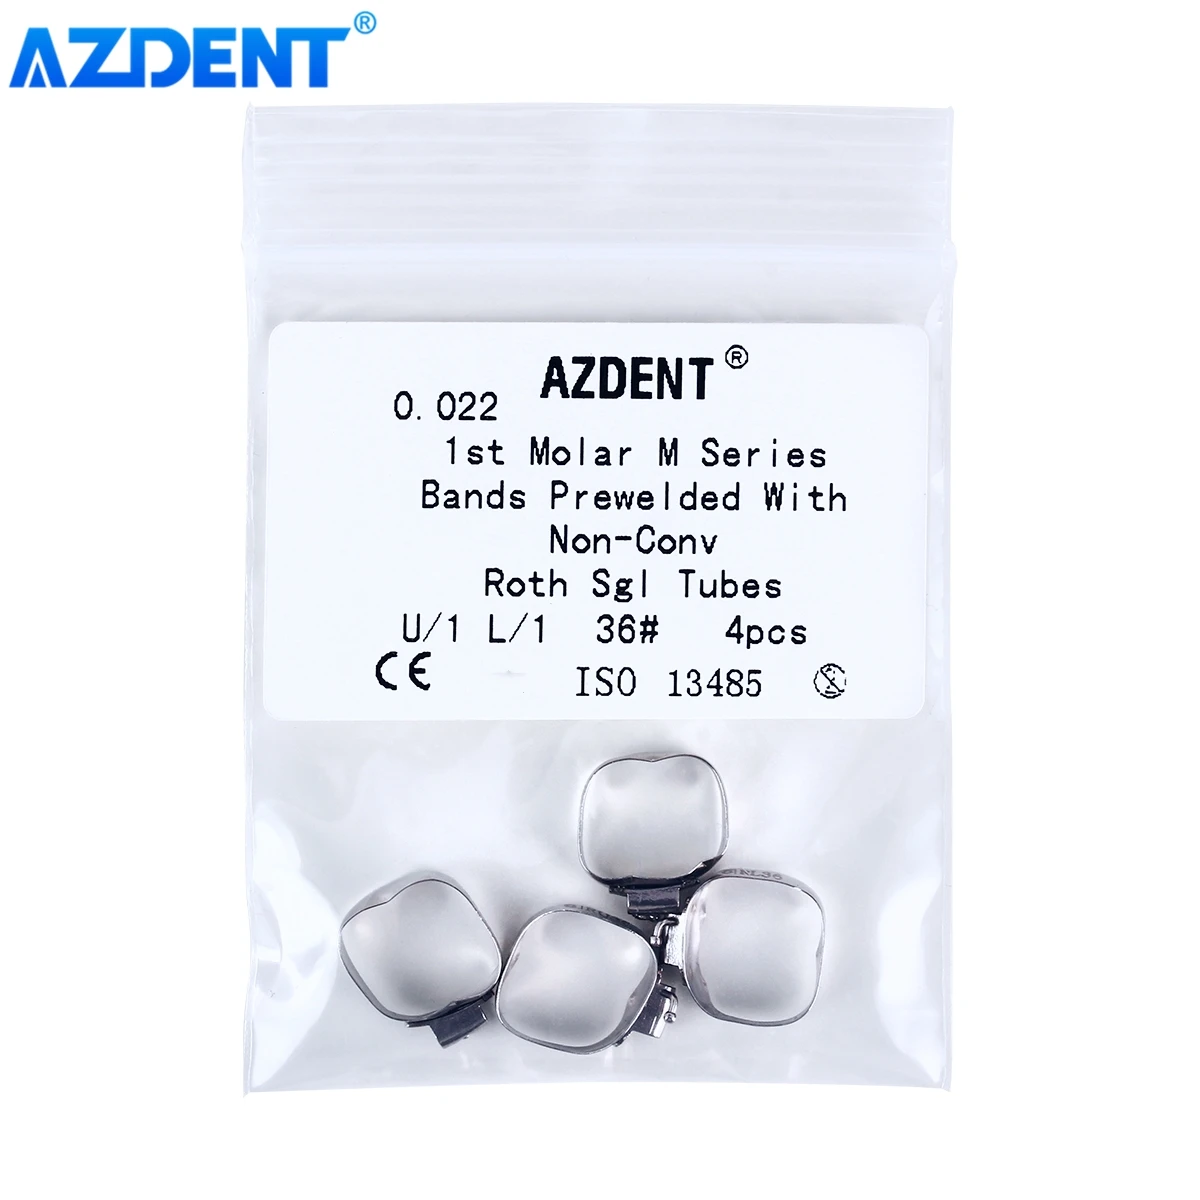 

AZDENT Dental Orthodontic Bands with Buccal Tubes for 1st Molar Roth 0.022 U 1/L 1 Nov-Convertible M Series Prewelded 36#-40#